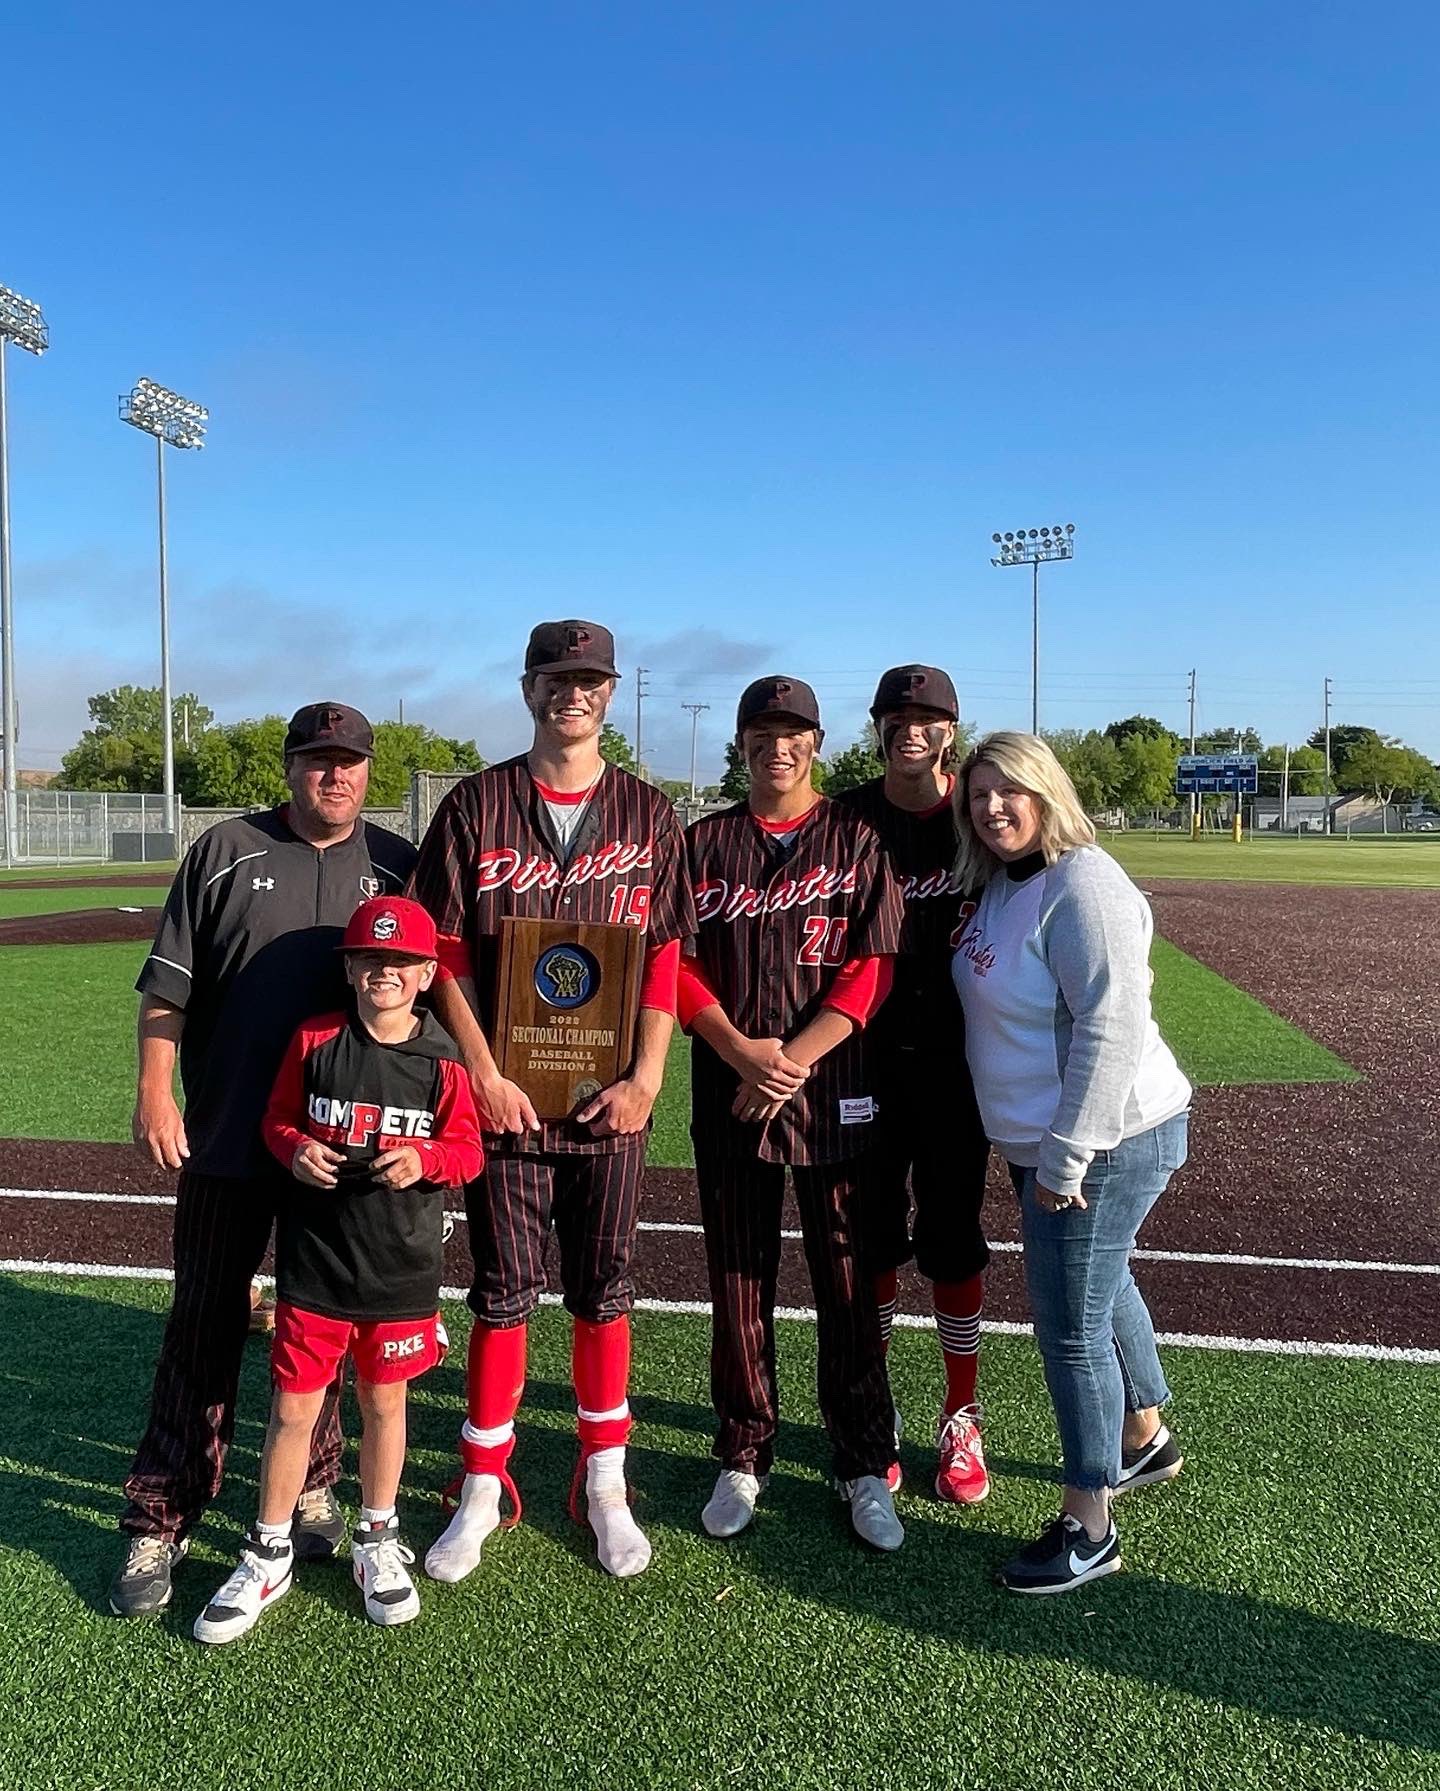 Pewaukee Baseball on X: Congratulations Carson. We are excited